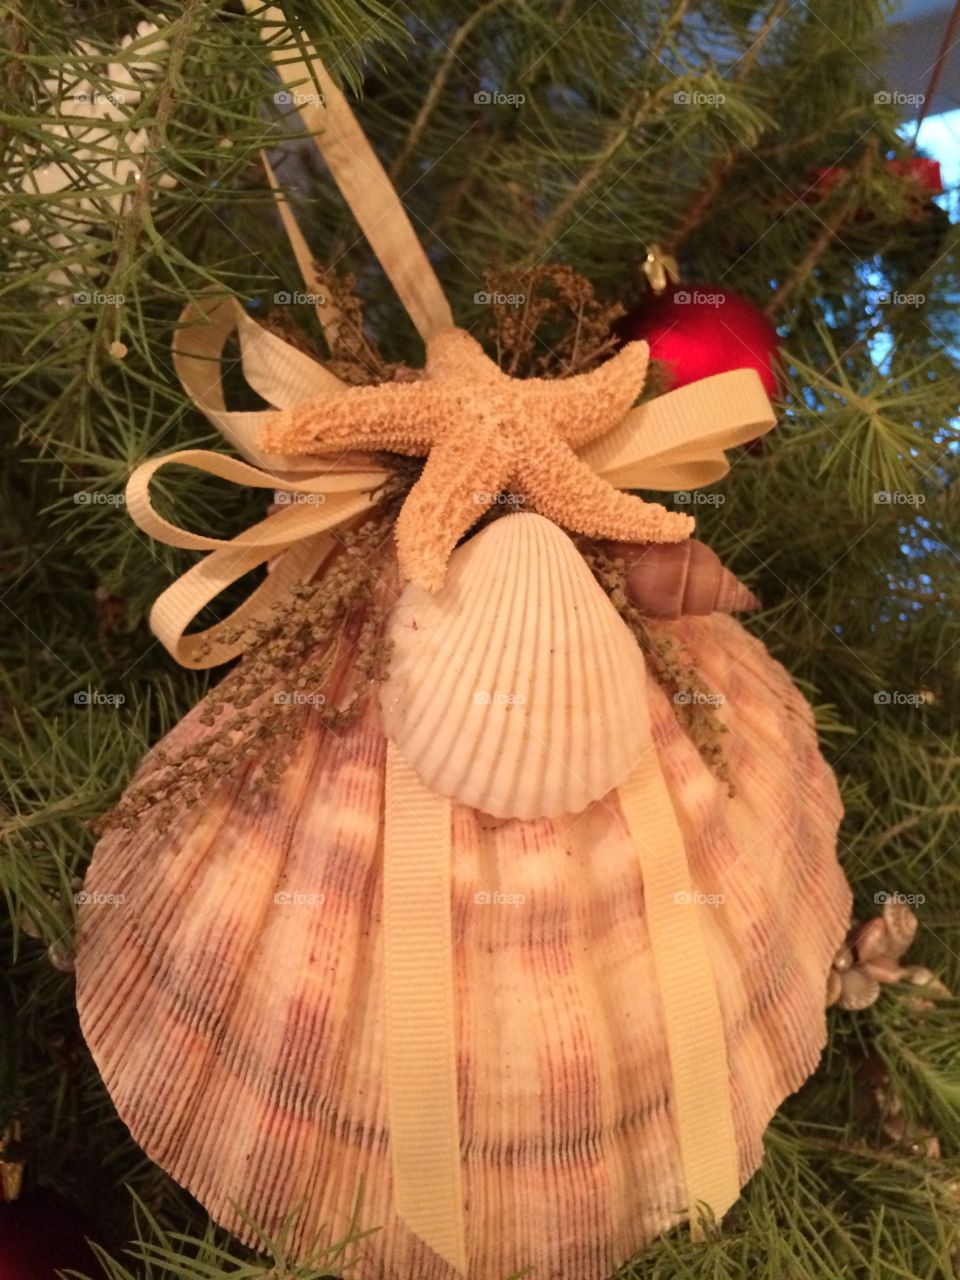 Giant clam ornament